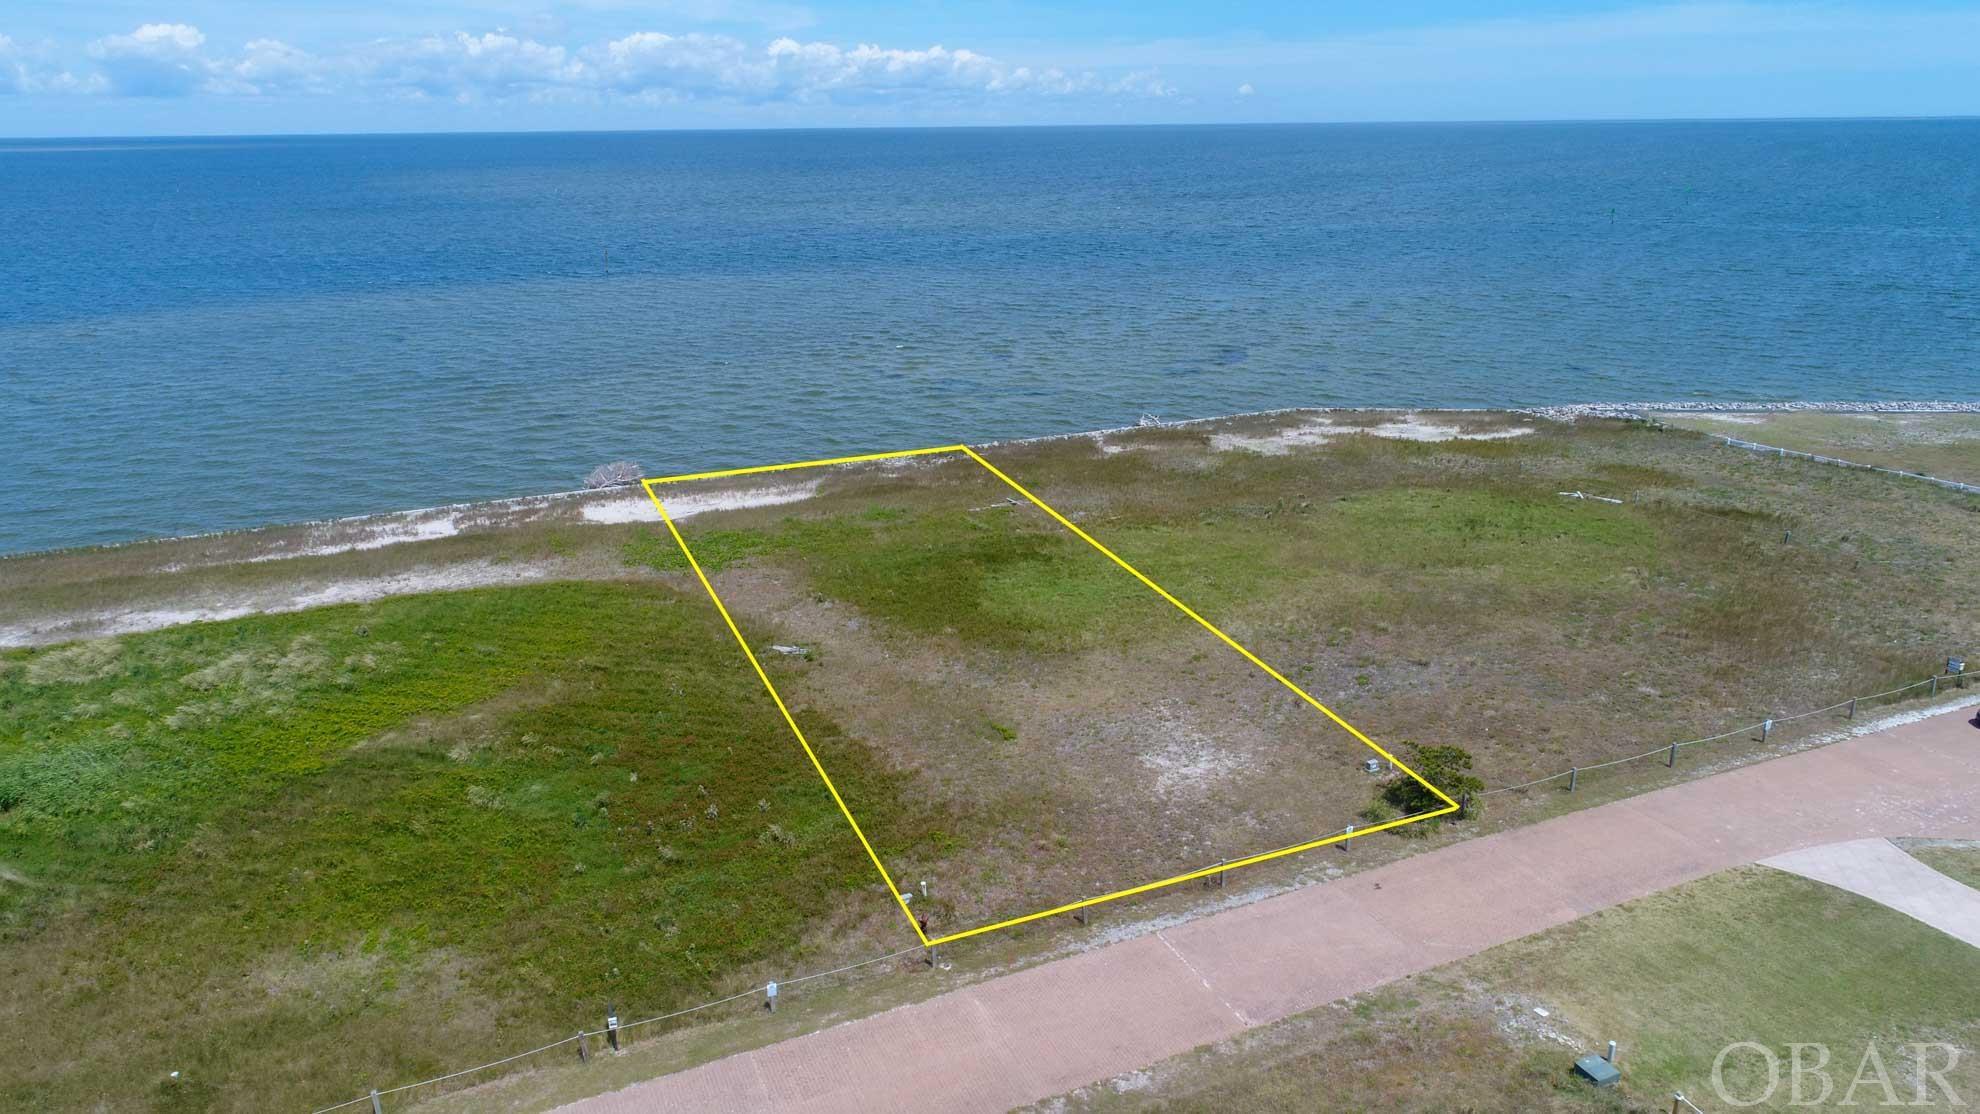 Great opportunity to be overlooking the Pamlico Sound. Enjoy summer sunsets and watch the boats after fishing. Great neighborhood close to shops and Hatteras Harbor marina, yet nestled back away from Hwy 12.